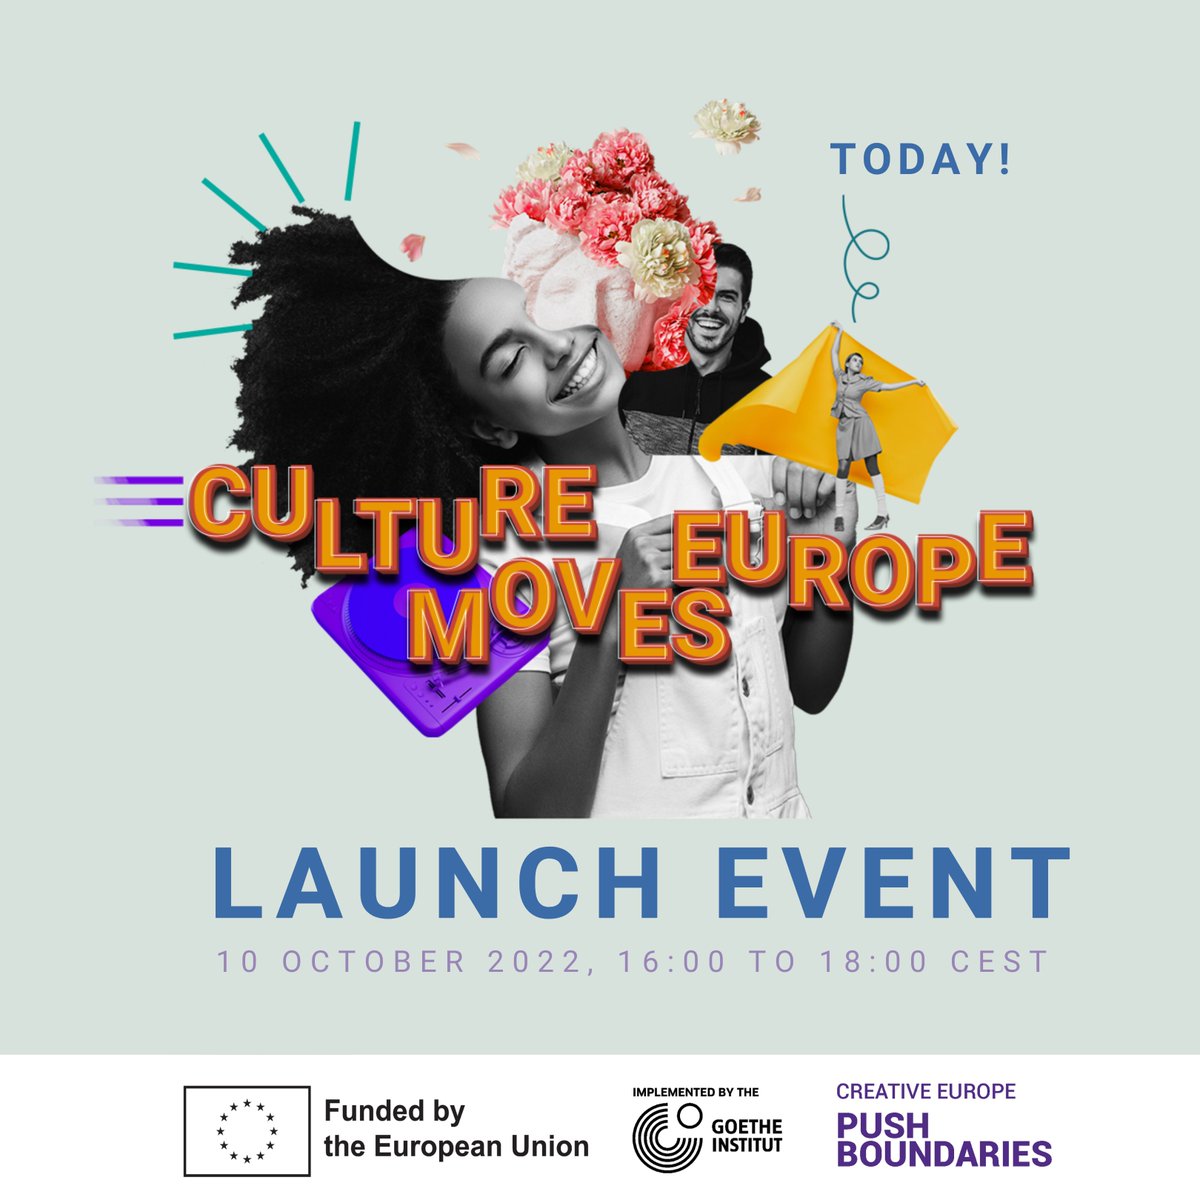 🙌🏻 Make sure to join us TODAY between 16:00 to 18:00 CEST for discussions, performances and activities related to cultural and artistic mobility, sustainability and of course, #CultureMovesEurope! If you haven’t registered follow our Youtube Livestream: ➡️bit.ly/CultureMovesEu…